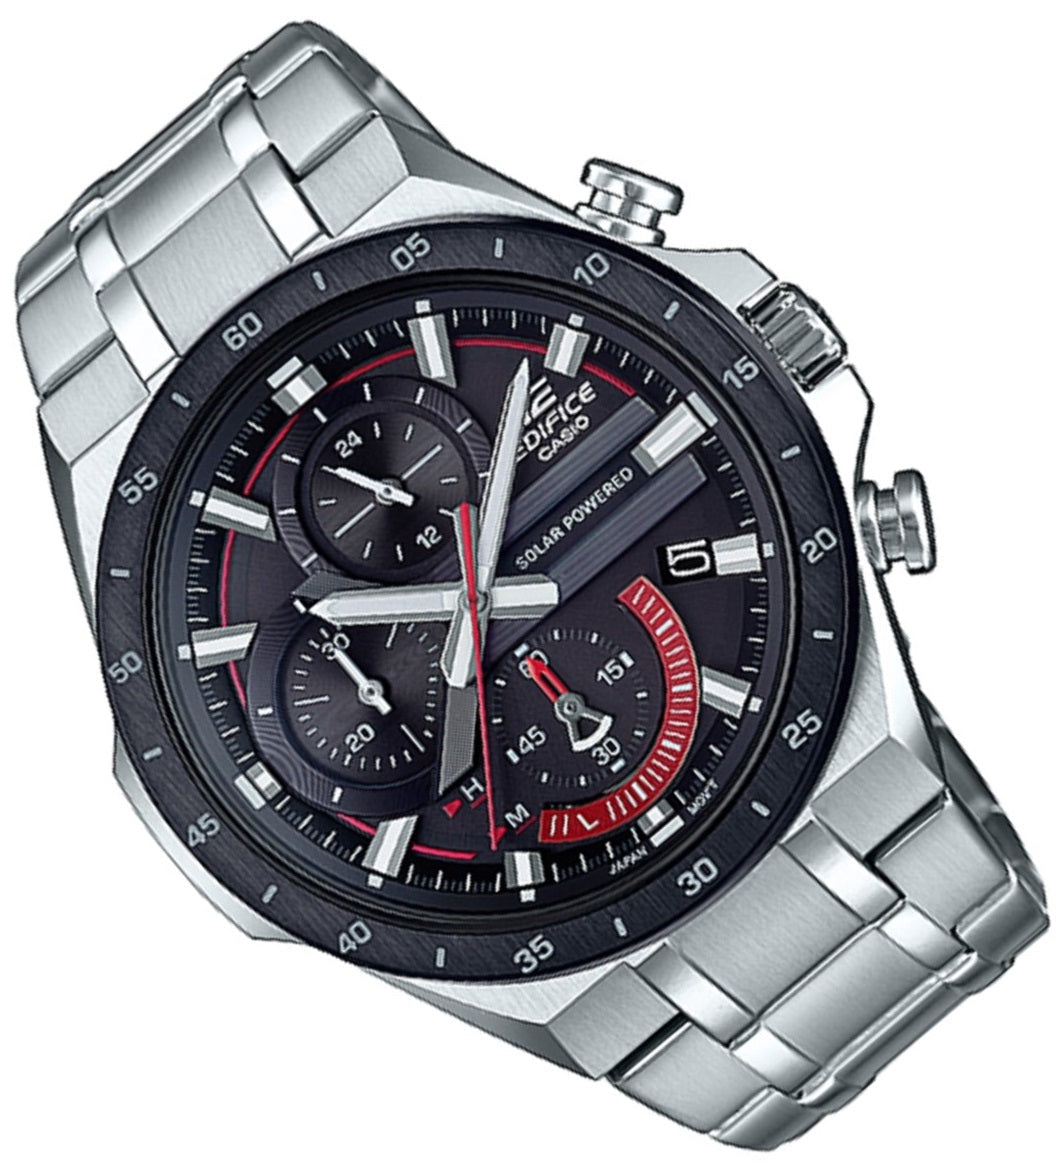 Casio Edifice EQS-920DB-1A Solar Chronograph Stainless Steel Strap Watch For Men-Watch Portal Philippines